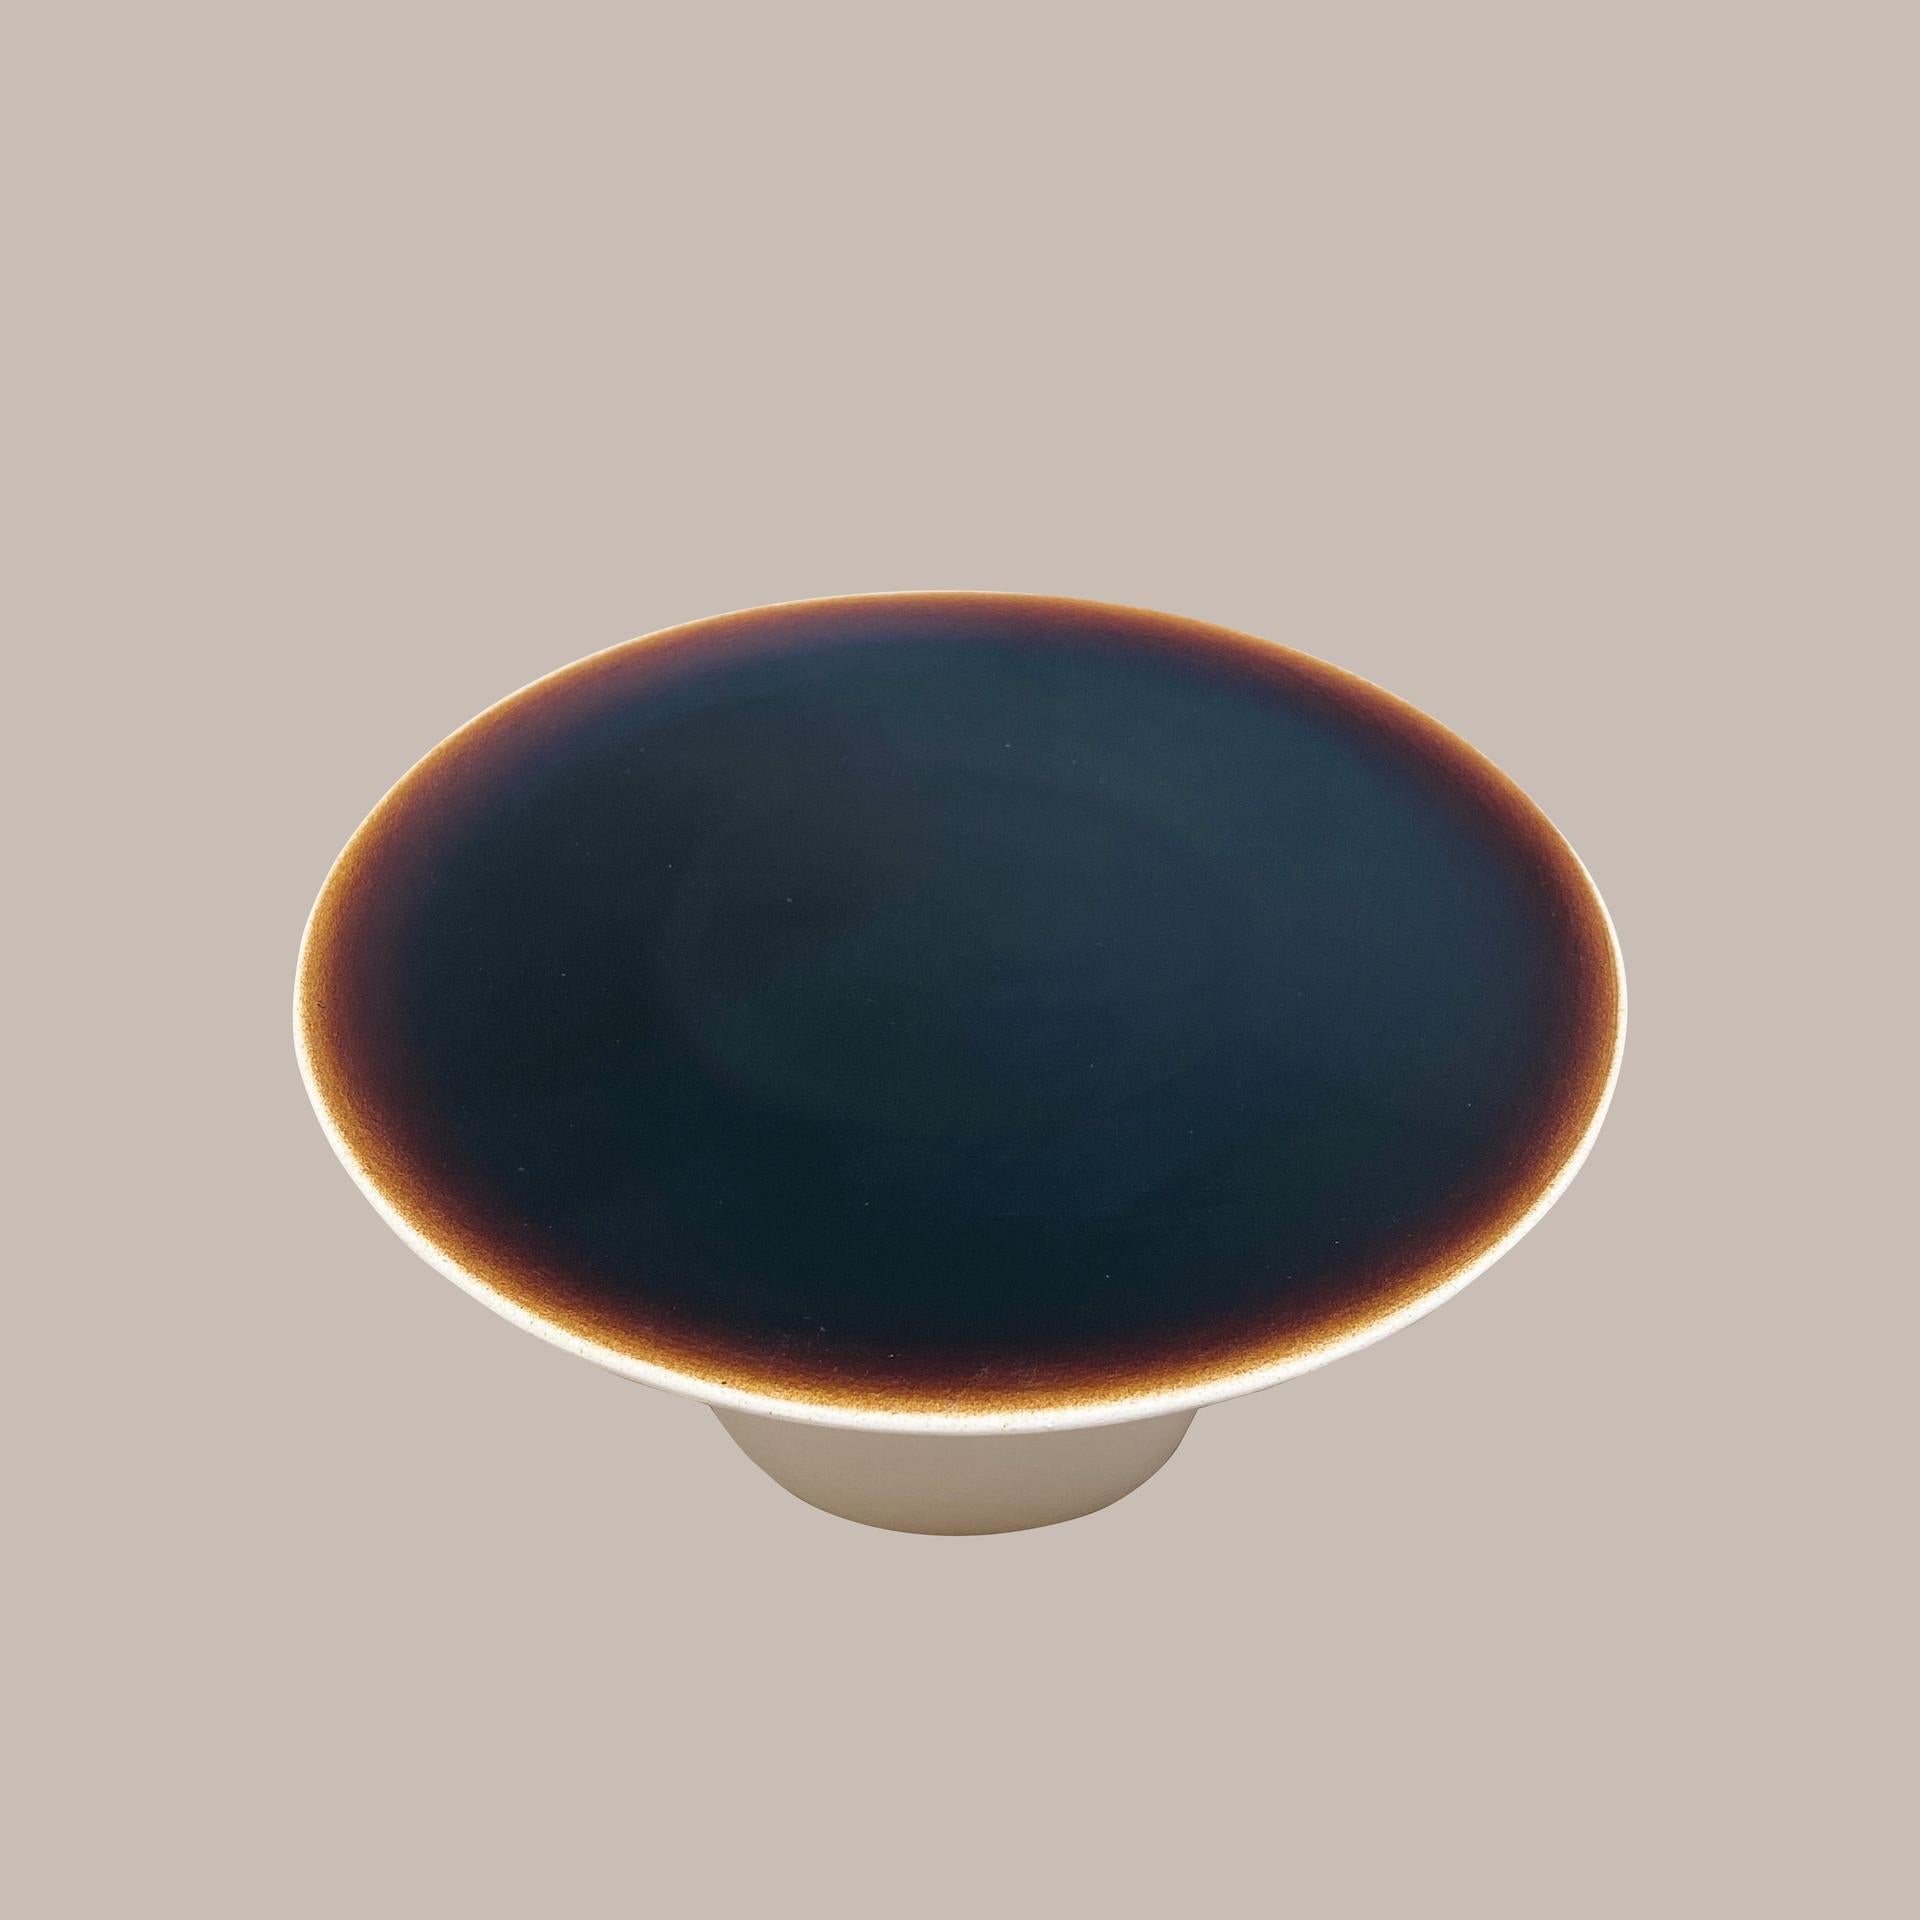 Ott another paradigmatic handmade ceramic high-plate by Studio Yoon Seok-hyeon
2019
Dimensions: W 18 x H 10 cm
Materials: Ott(Natural resin from Ott tree), porcelain
650g

It is available to customize various colors in Ott's natural color